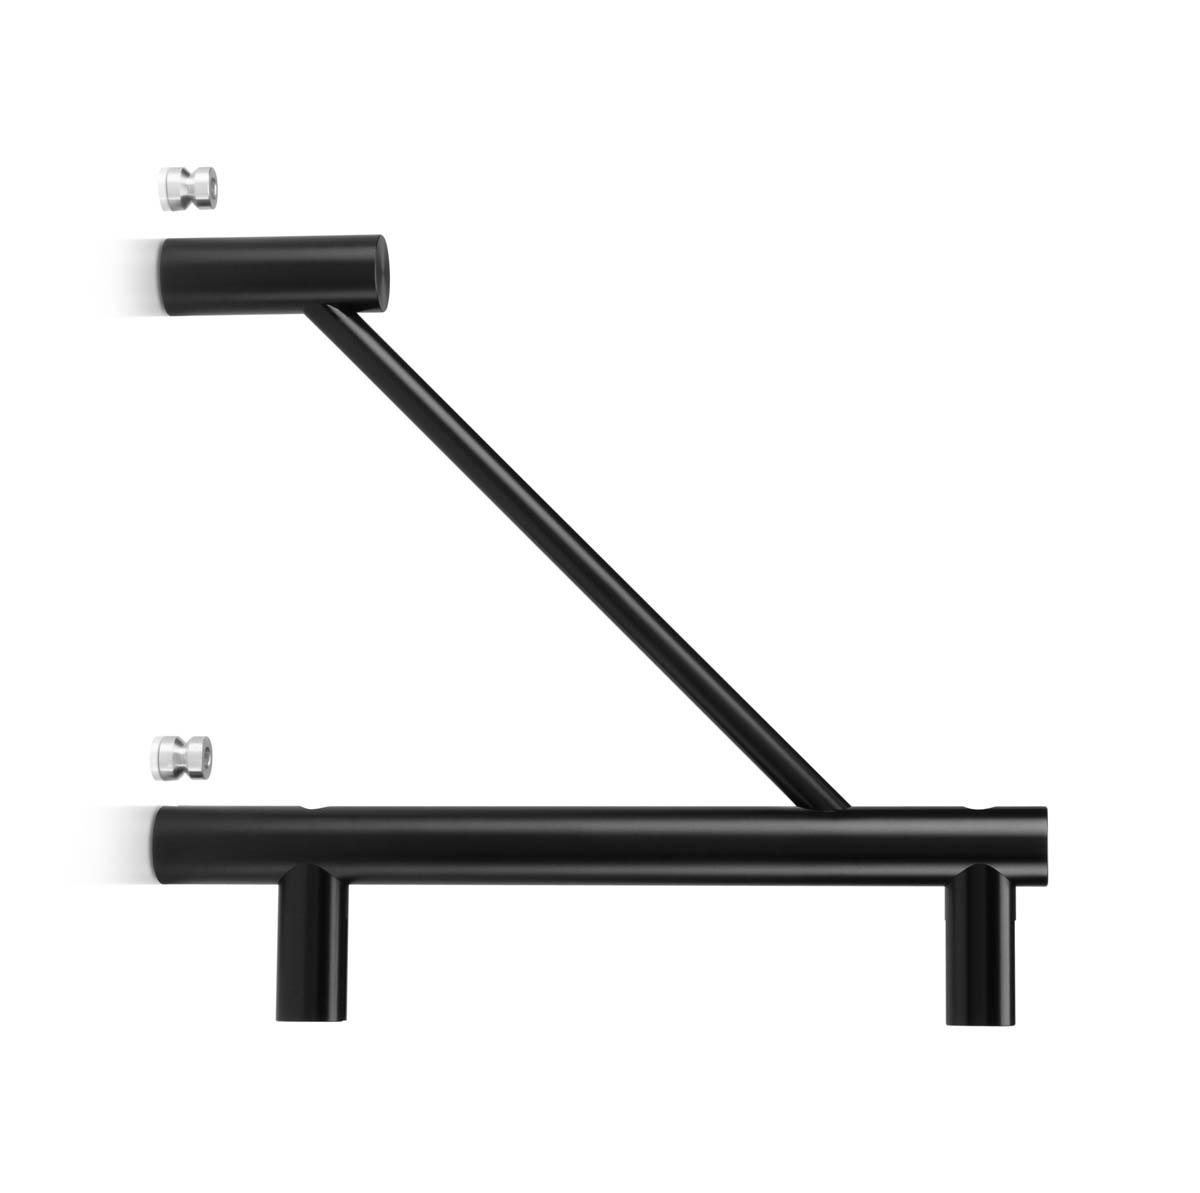 Aluminum Flag Sign Bracket Only, Matte Black Anodized Finish. 5/16'' Thickness Material Accepted, 7-7/8 Length, 3/4'' Diameter. (Sold Without Panel, Bracket Only)